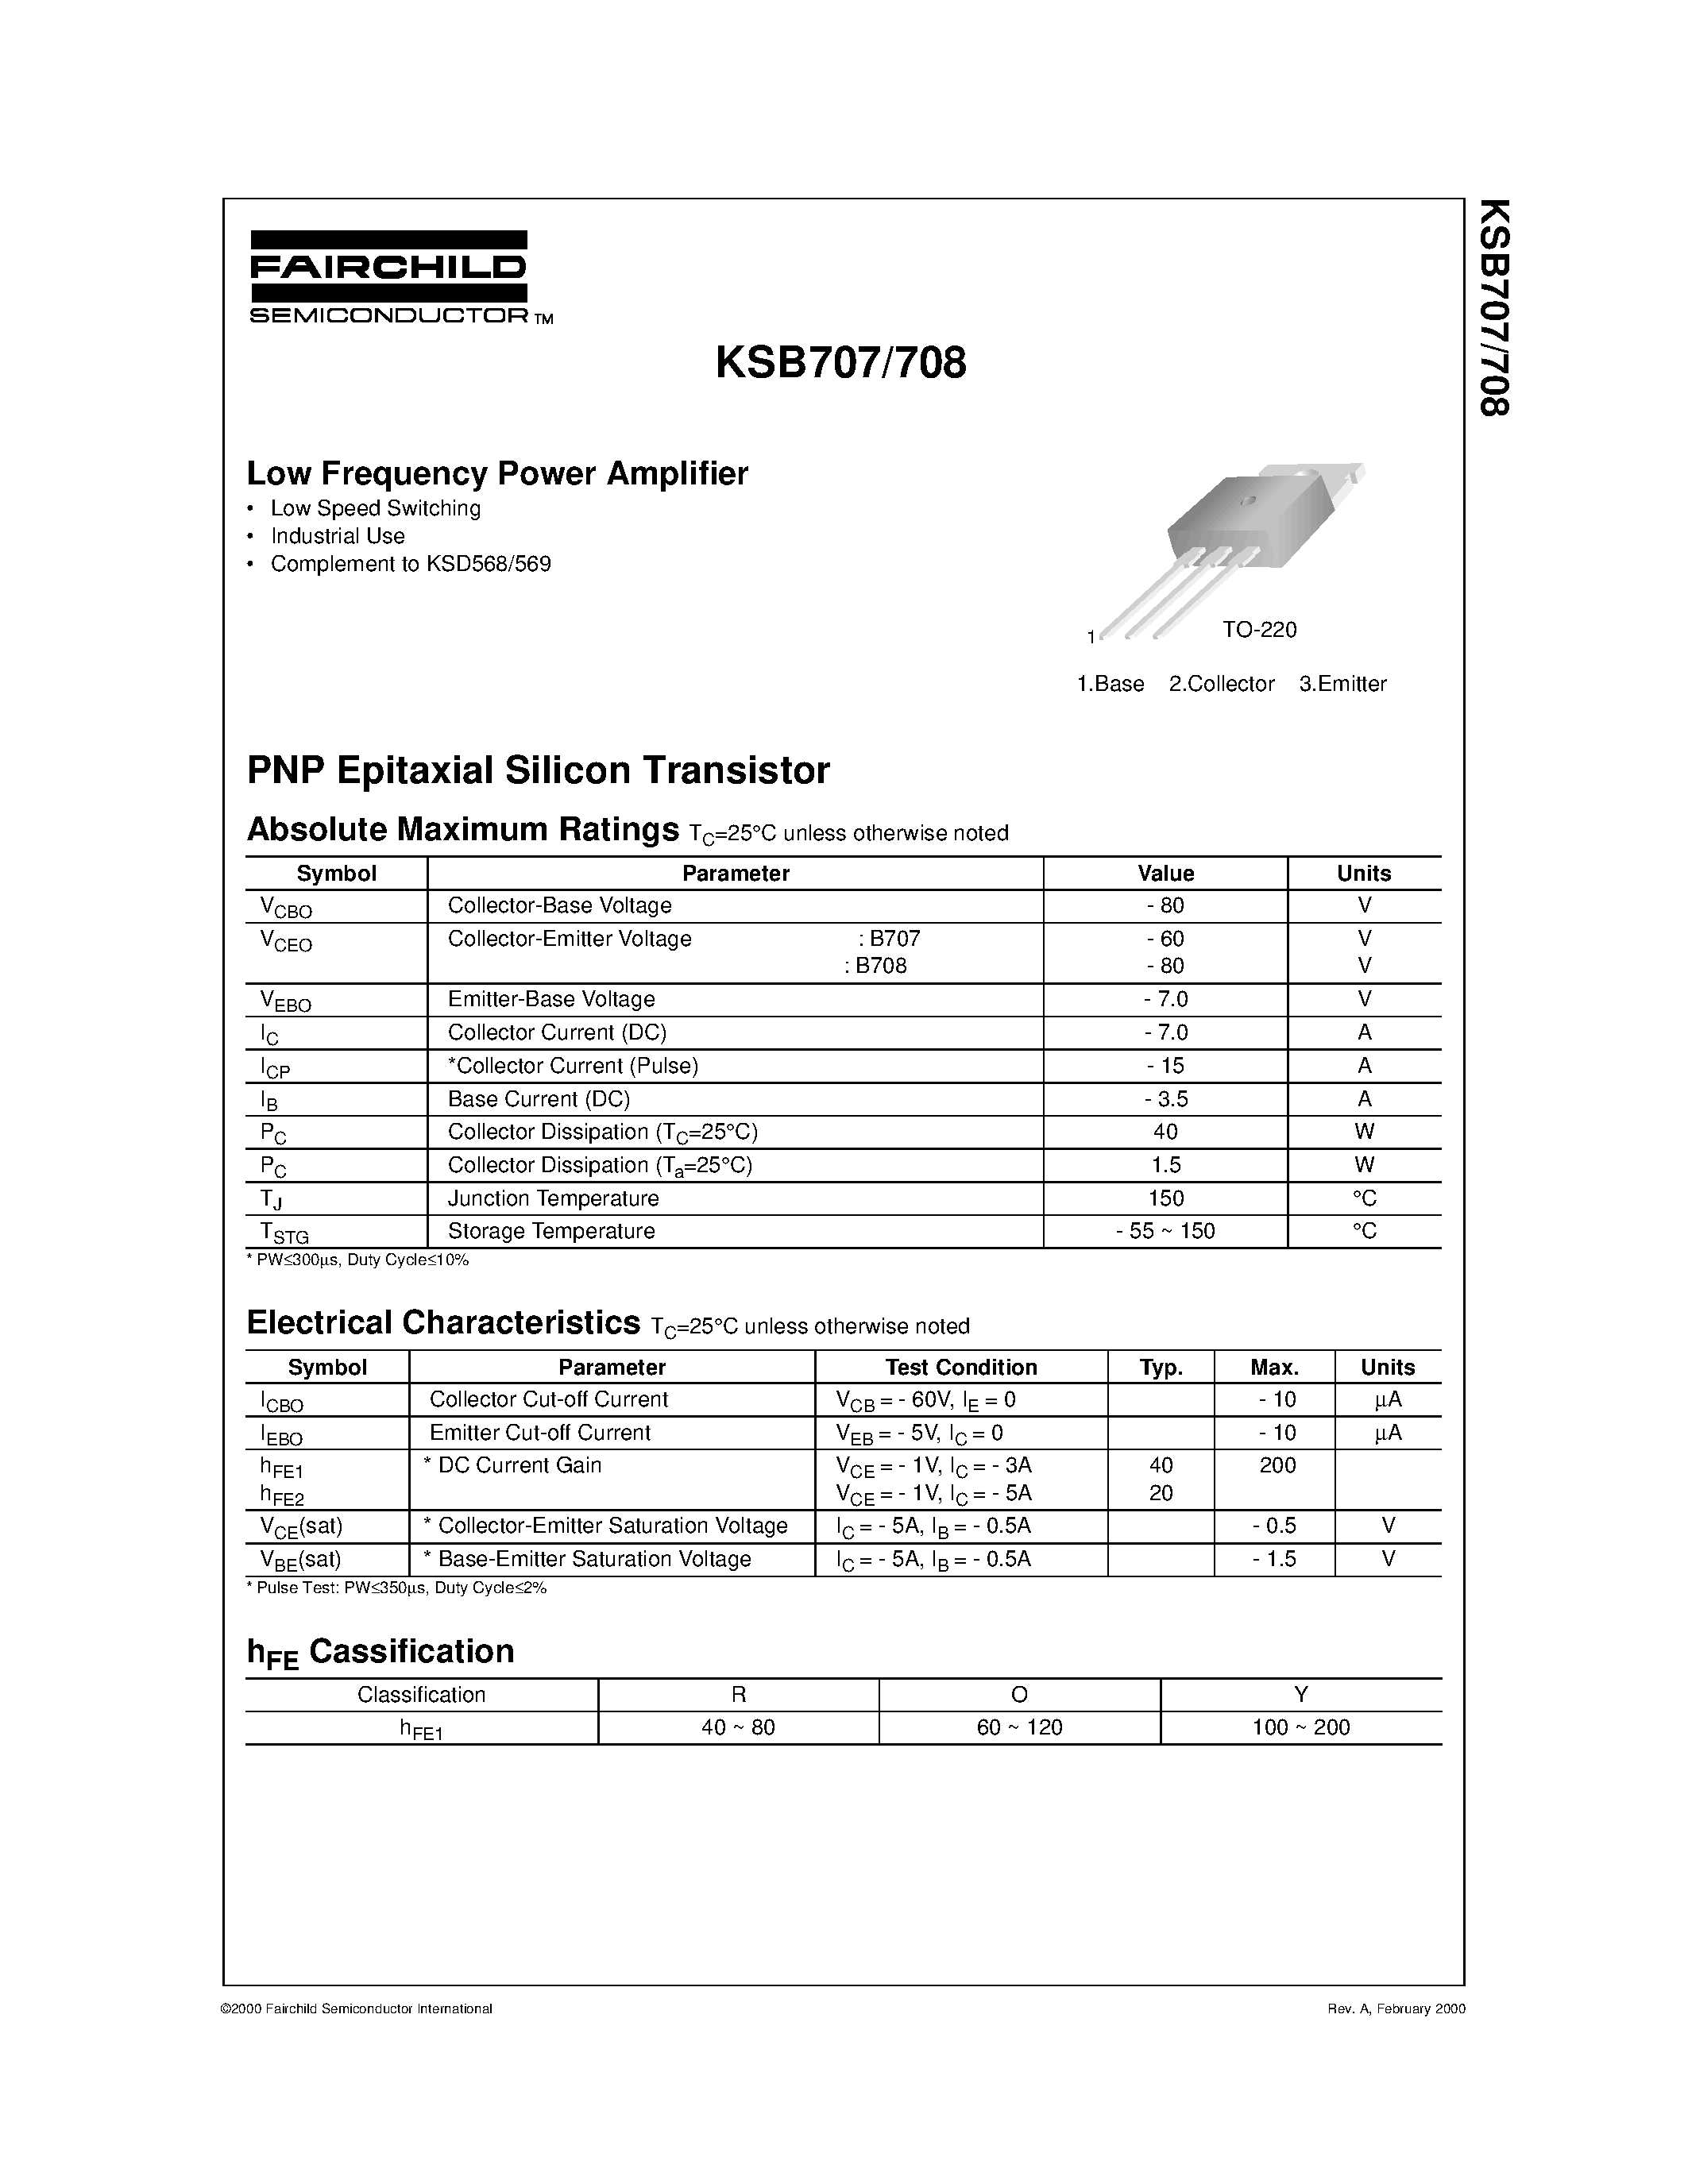 Datasheet KSB708 - Low Frequency Power Amplifier page 1